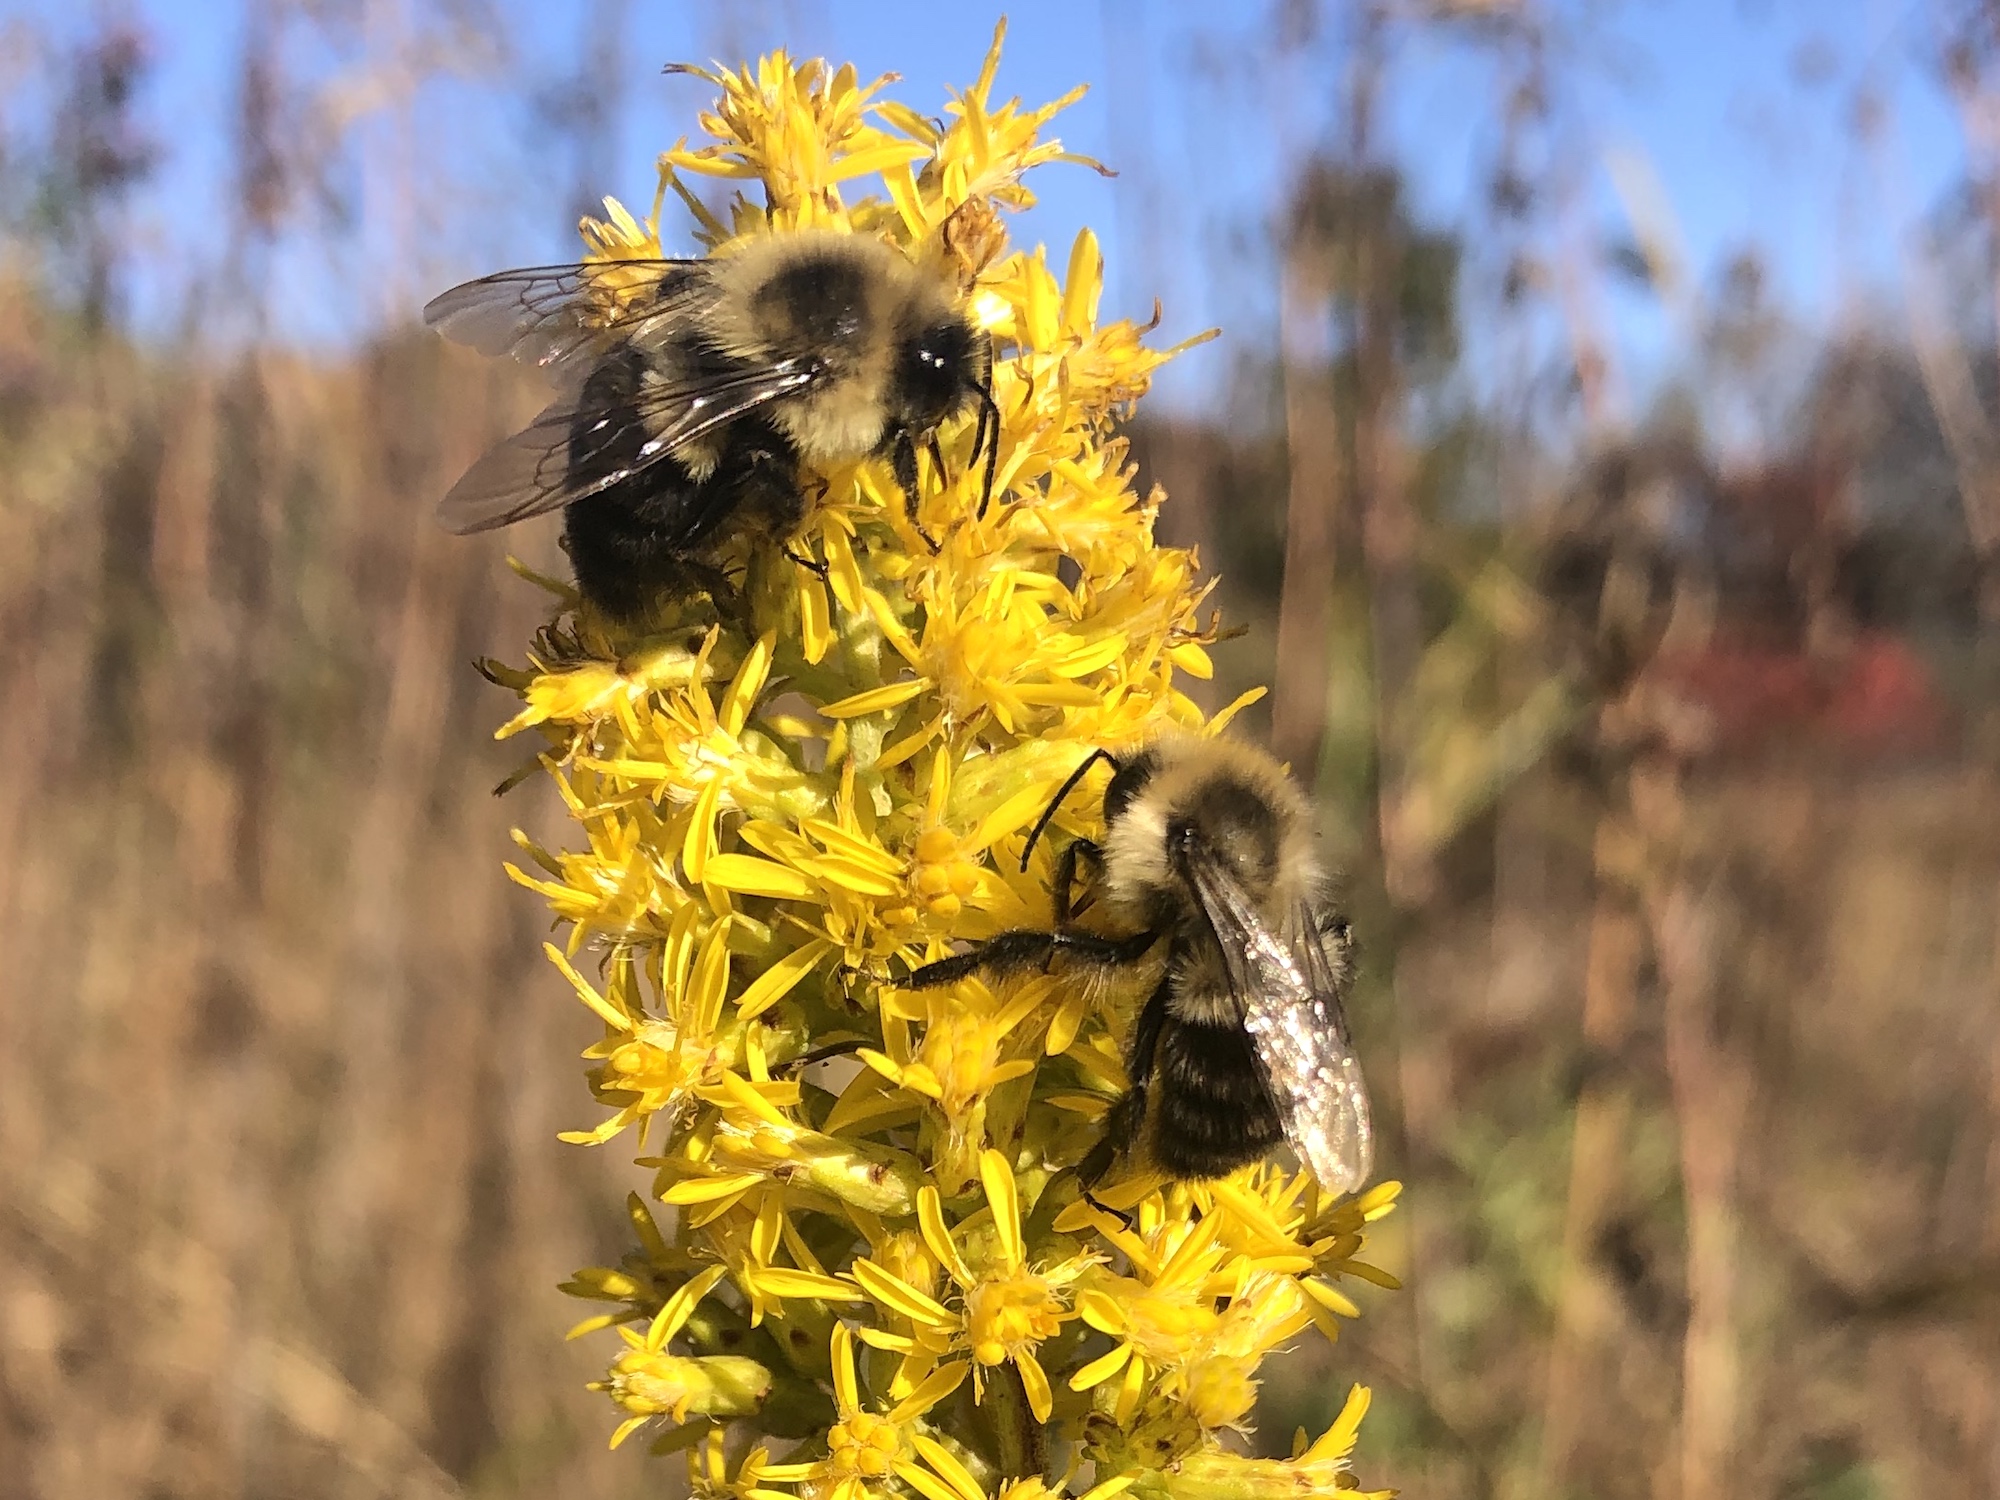 Bumblebees on Showy Goldenrod on October 13, 2020.